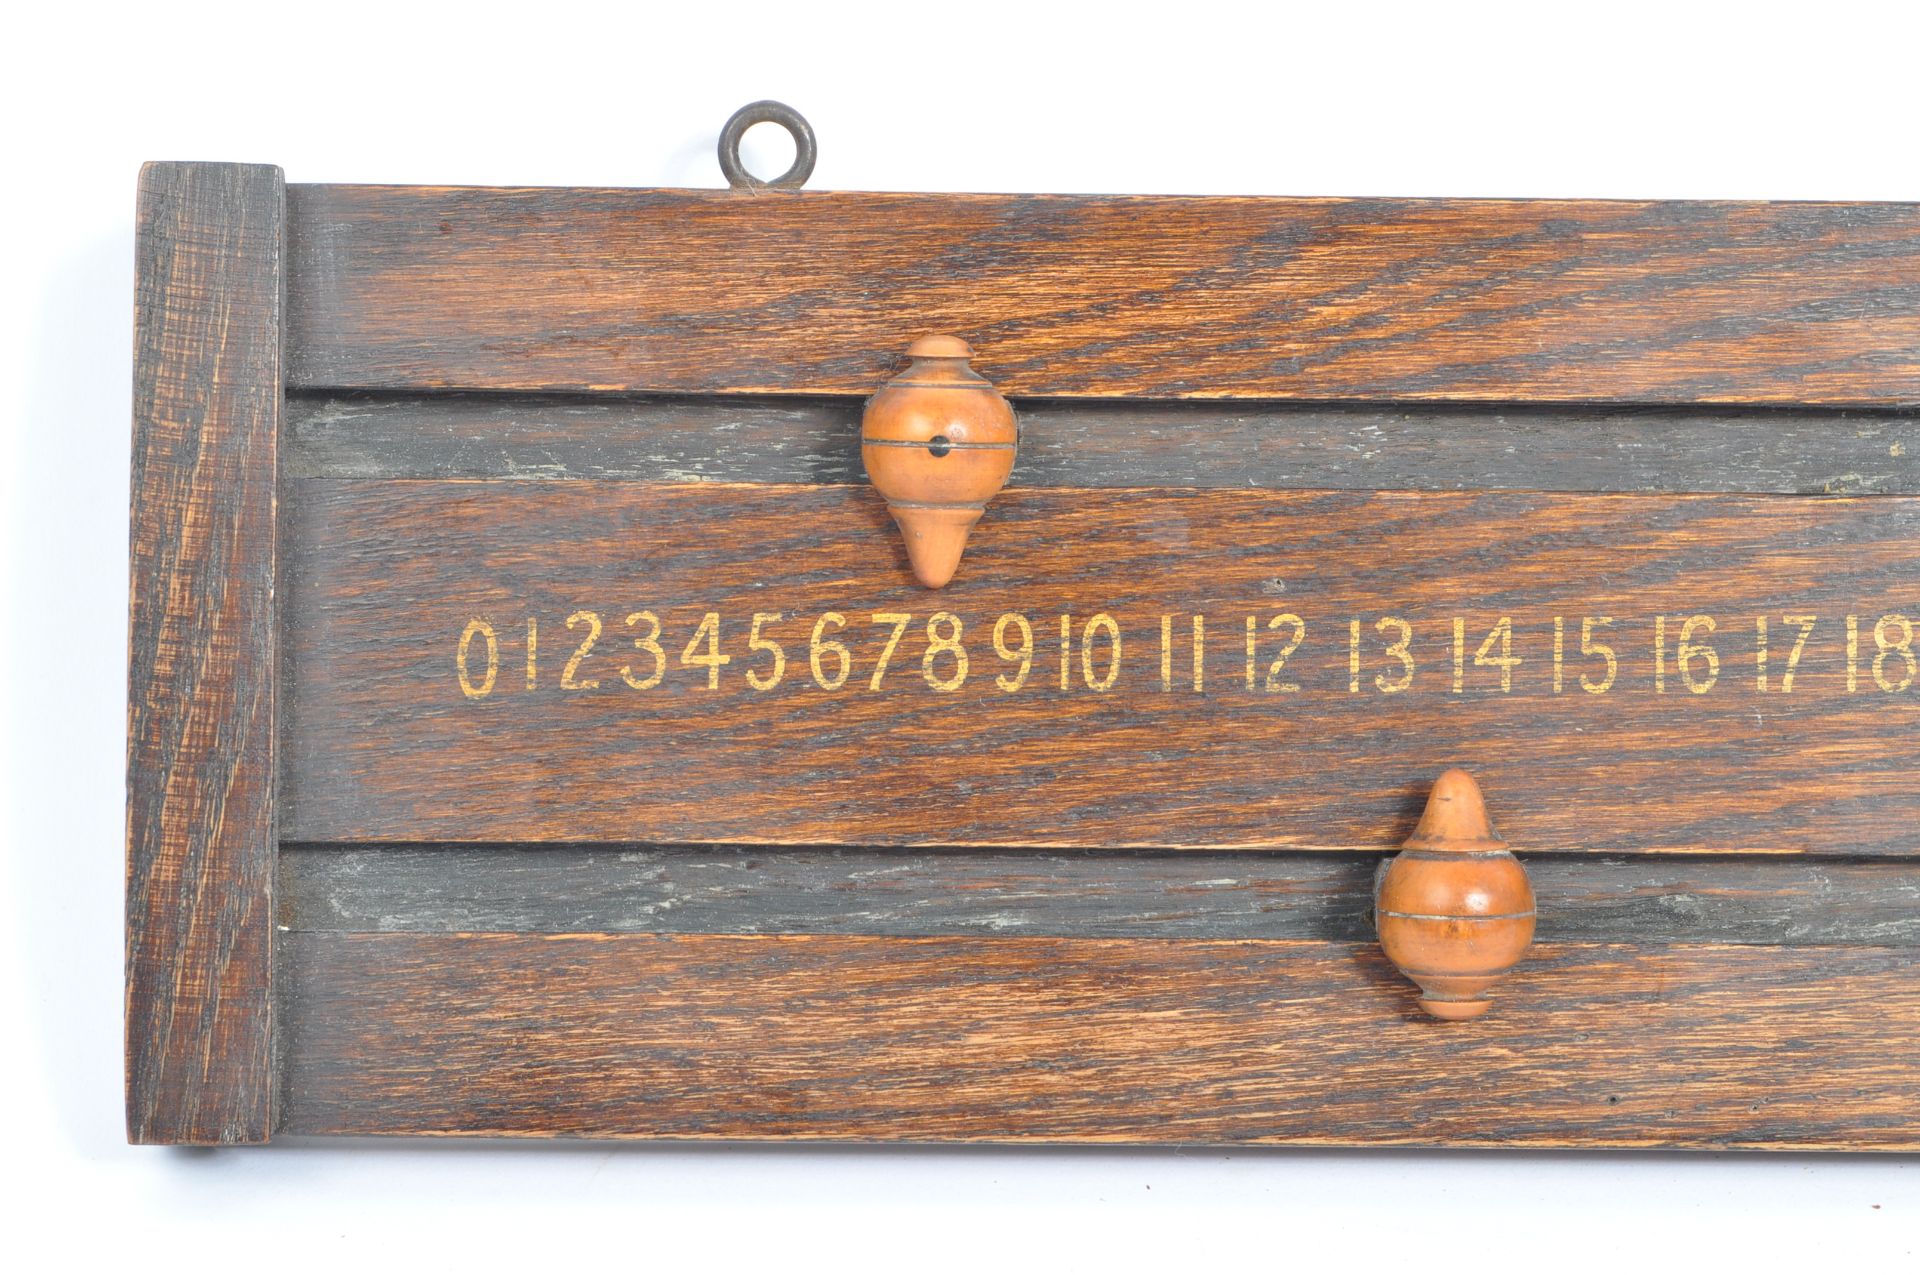 ANTIQUE WALL MOUNTED BILLIARDS SNOOKER SCORE BOARD - Image 2 of 5